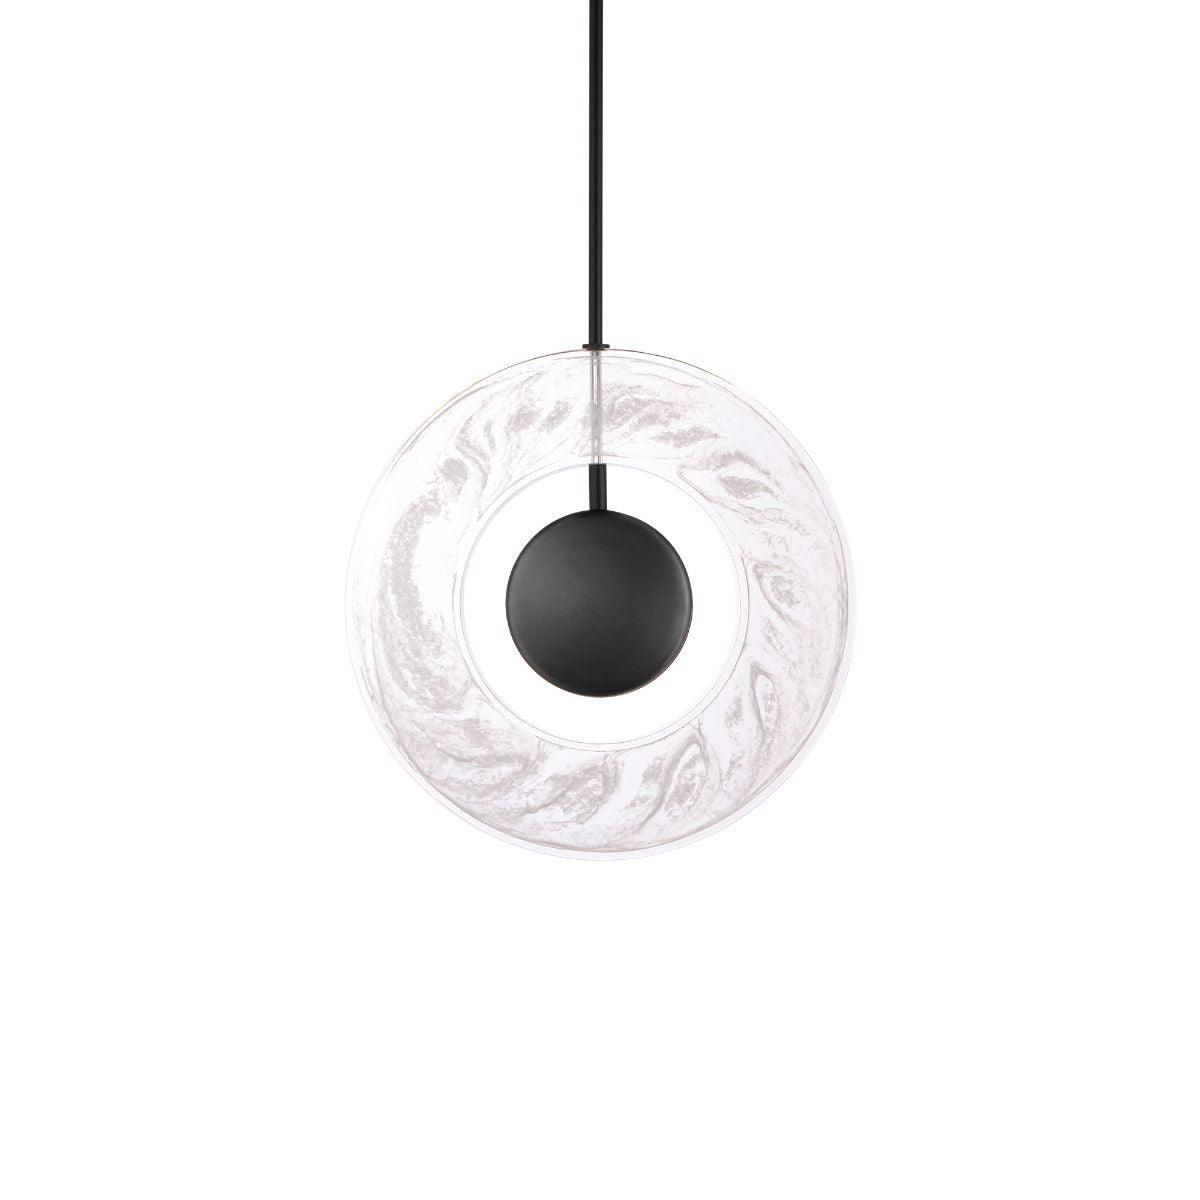 Cymbal 14 in. LED Pendant Light